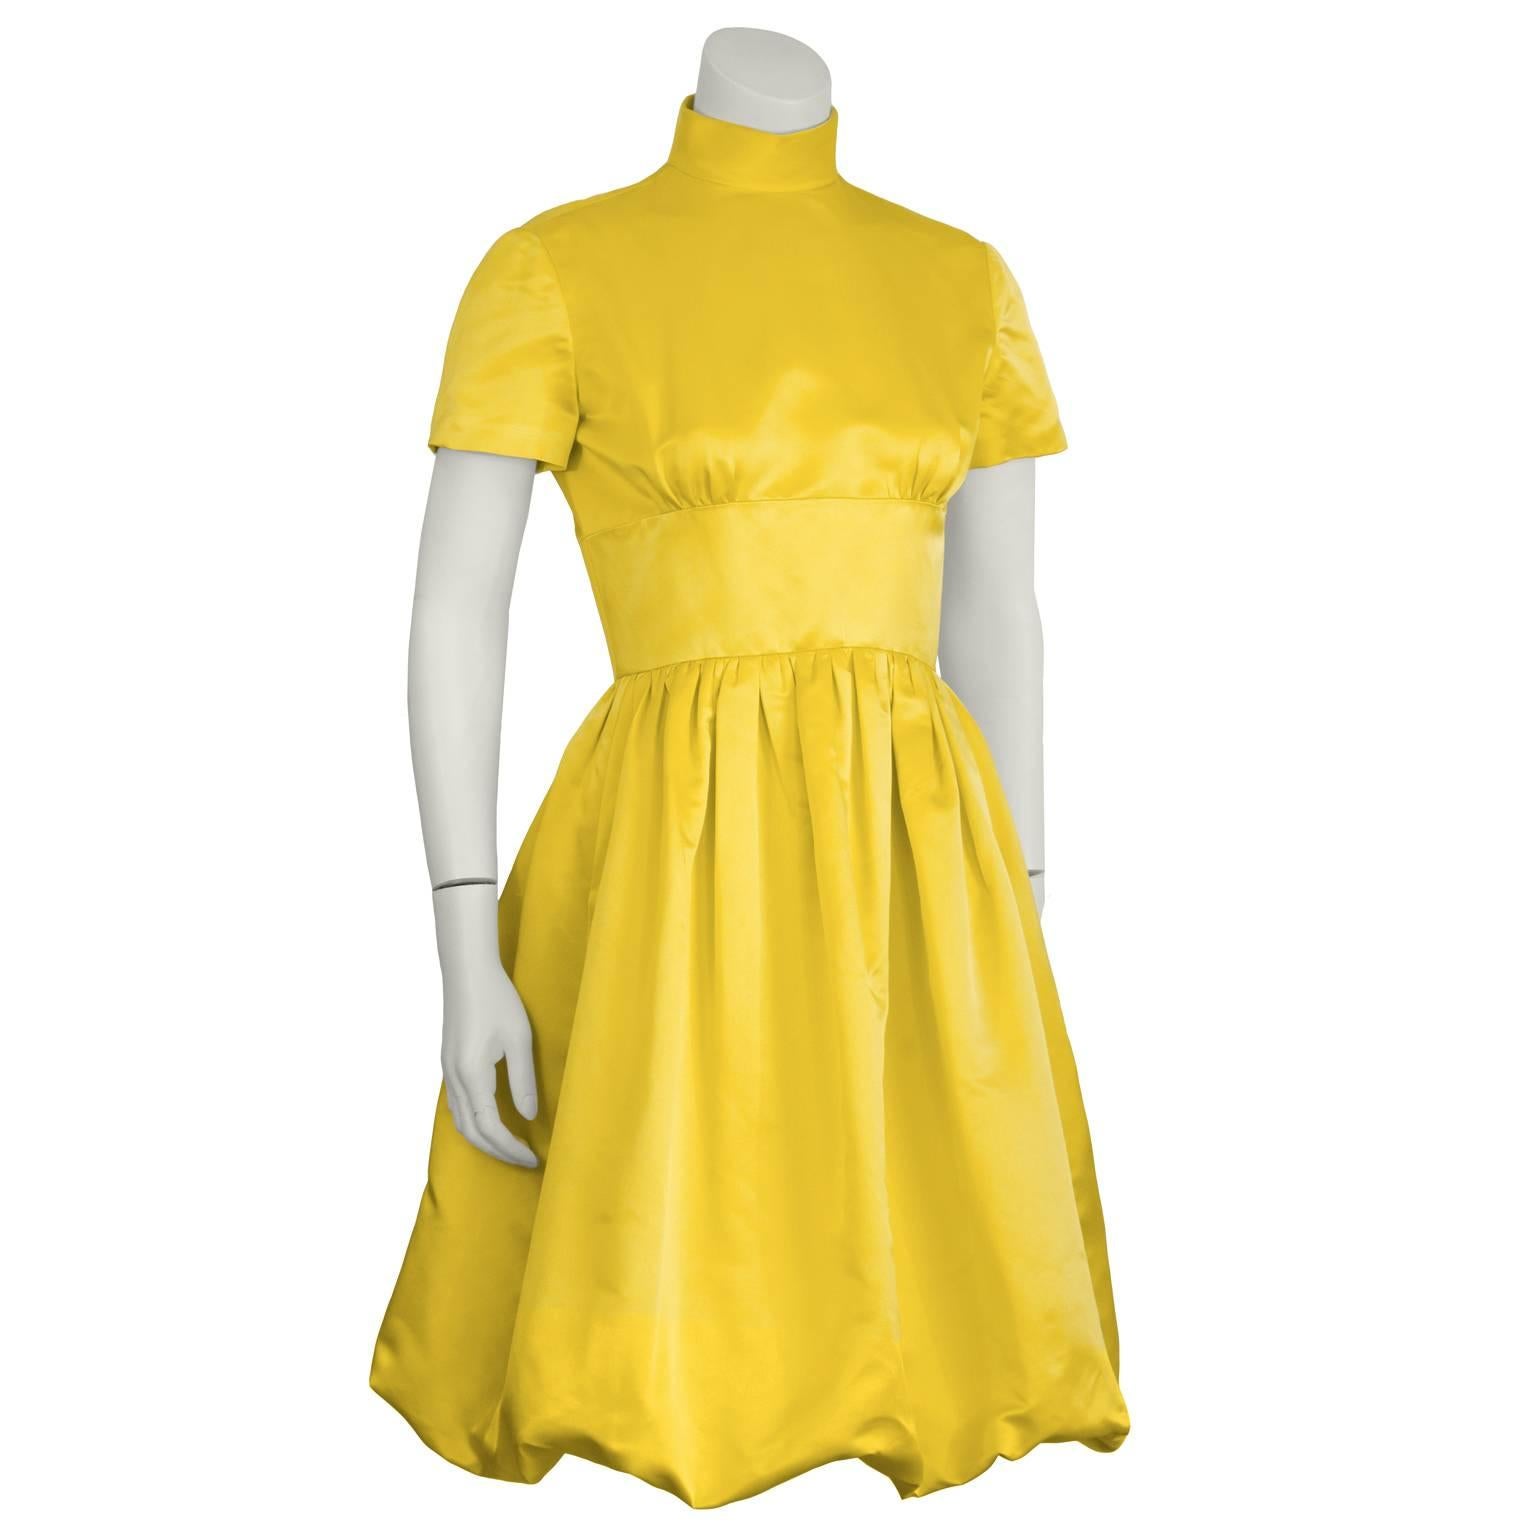 Stunning 1960's yellow satin bubble hem cocktail dress made for I Magnin's couture studio featuring a raised band collar, short sleeves, a wide fitted waist with a full gathered skirt. Fastens with fabric covered loop buttons and hidden snaps.